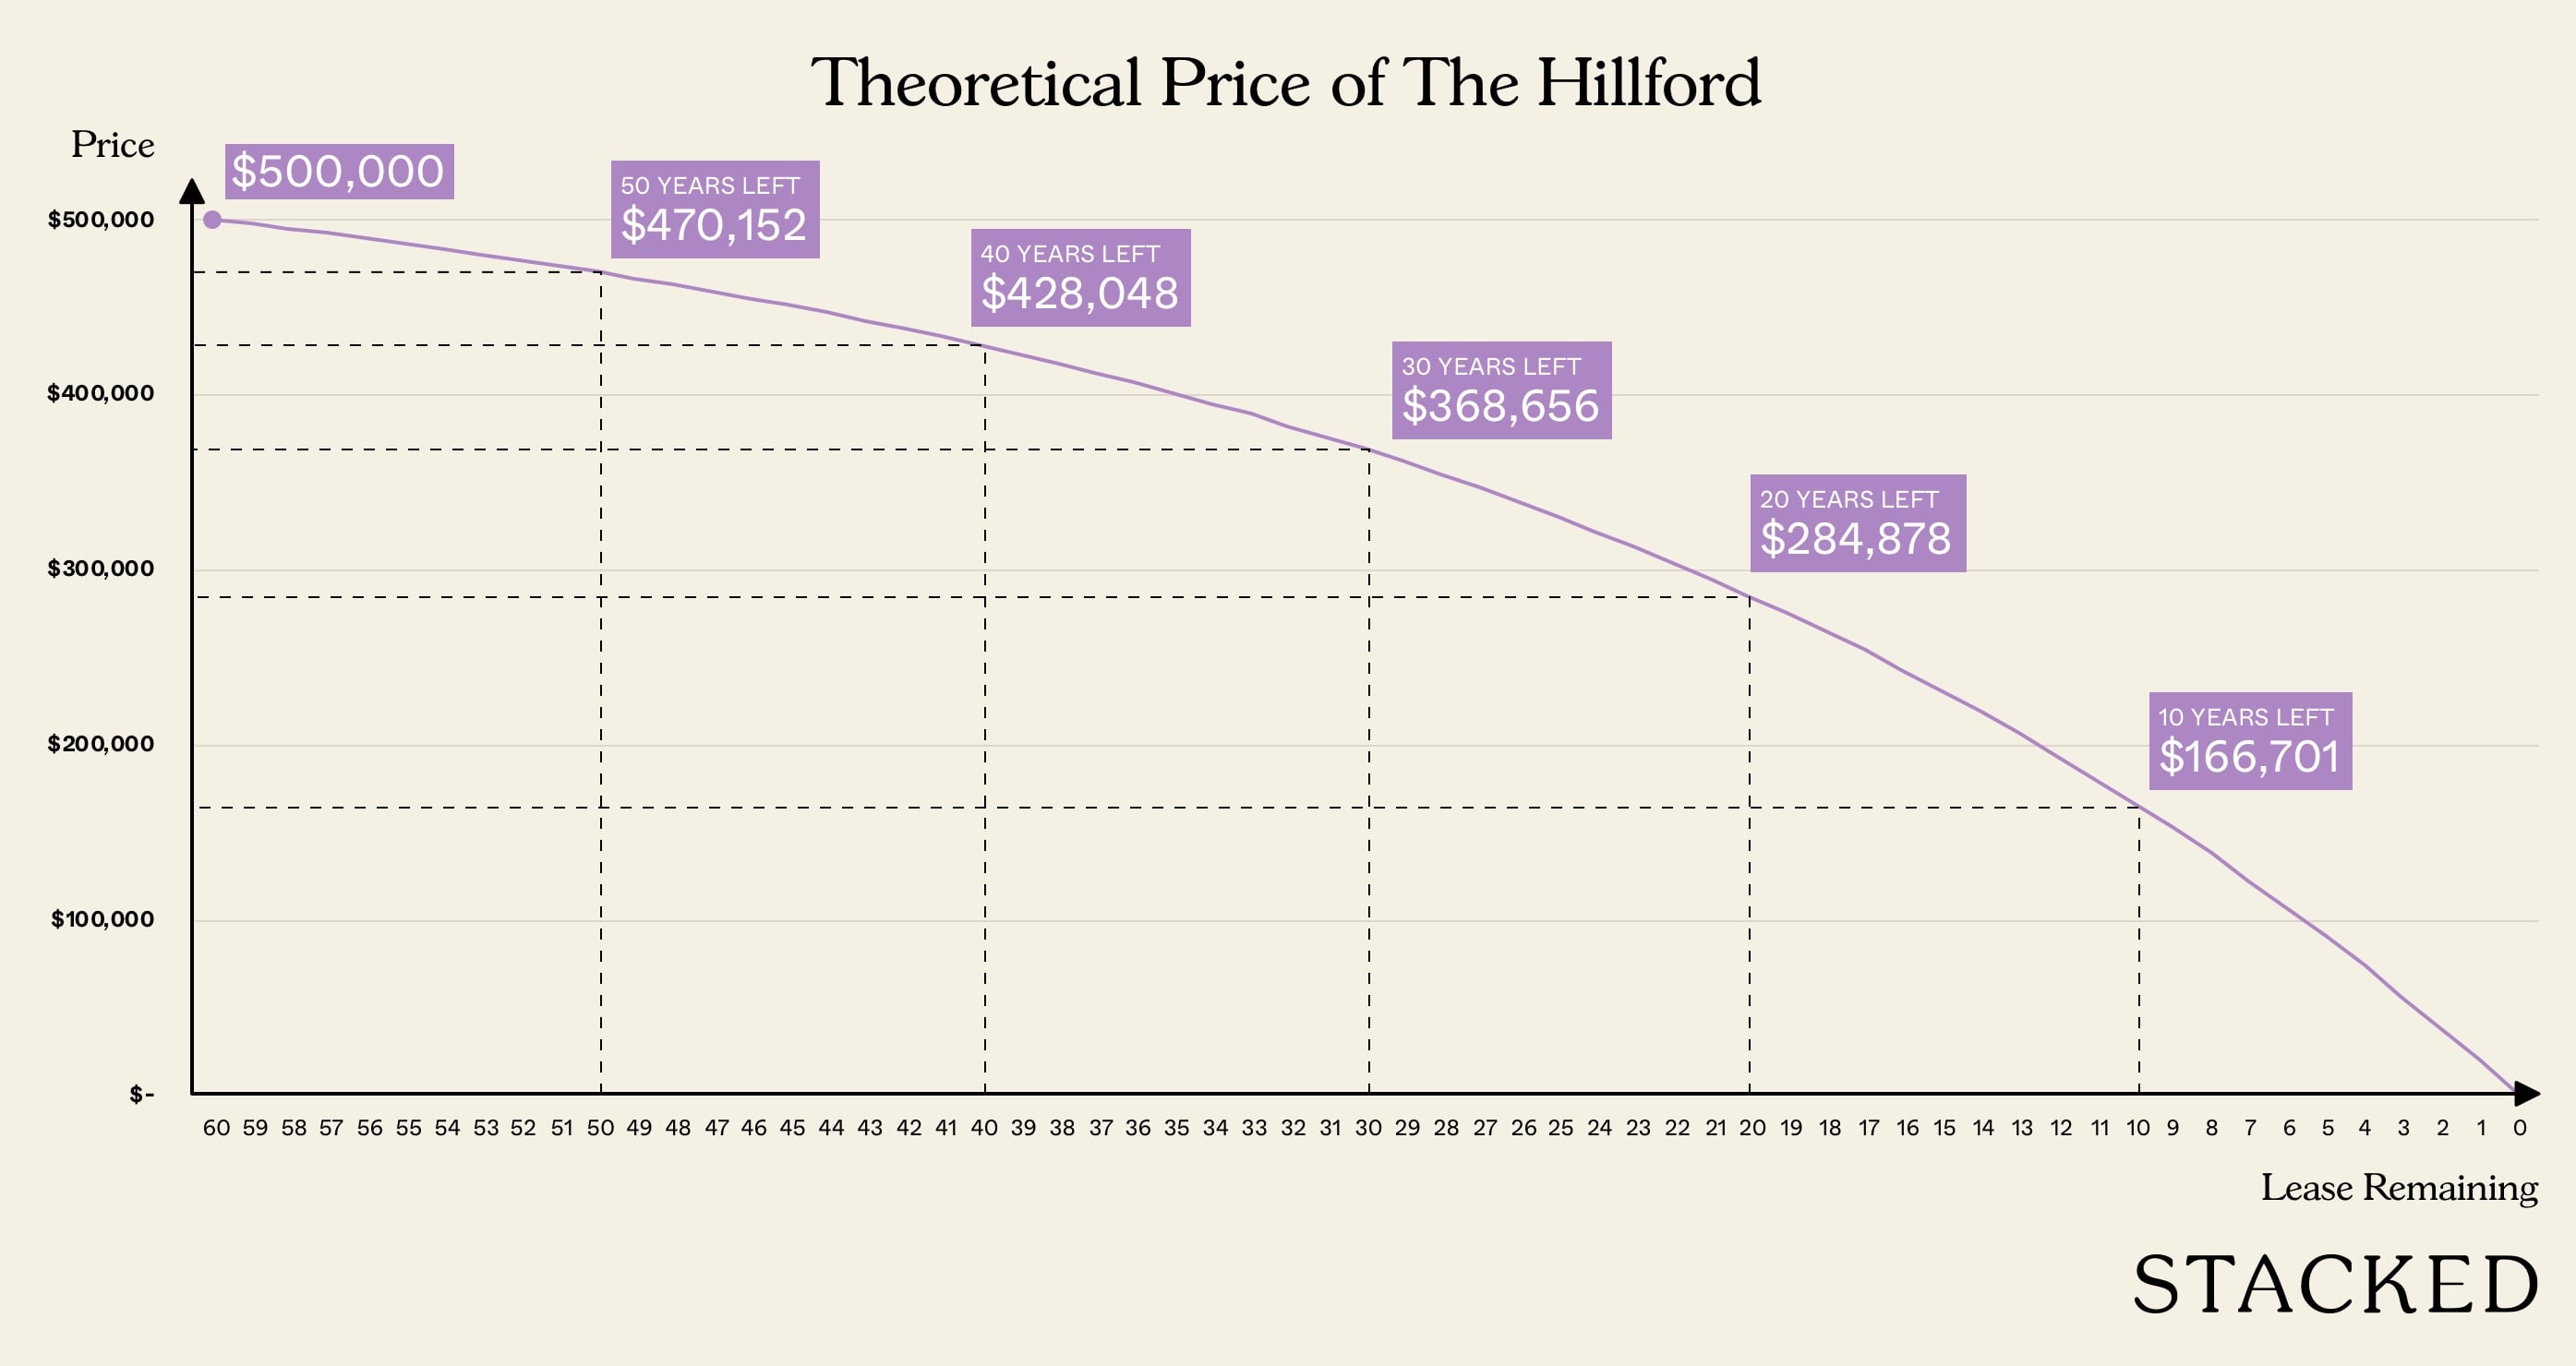 The Hillford Theoretical Price